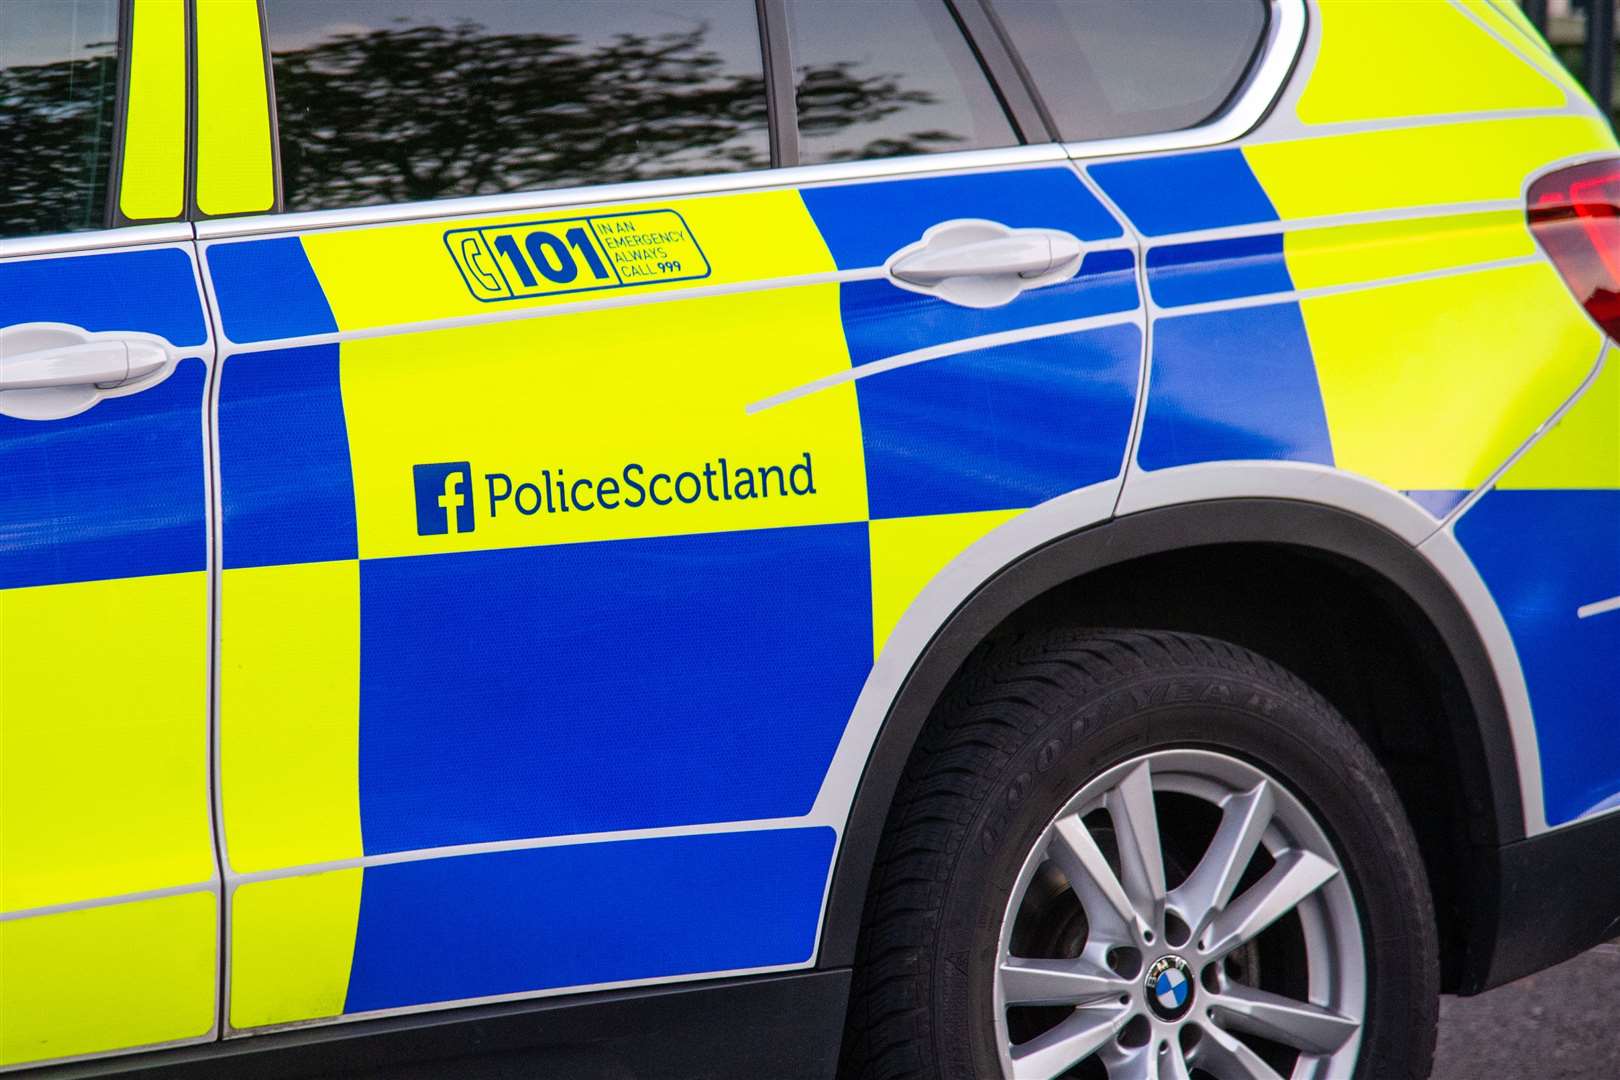 Police Scotland's roads division are keeping Scotland safe.